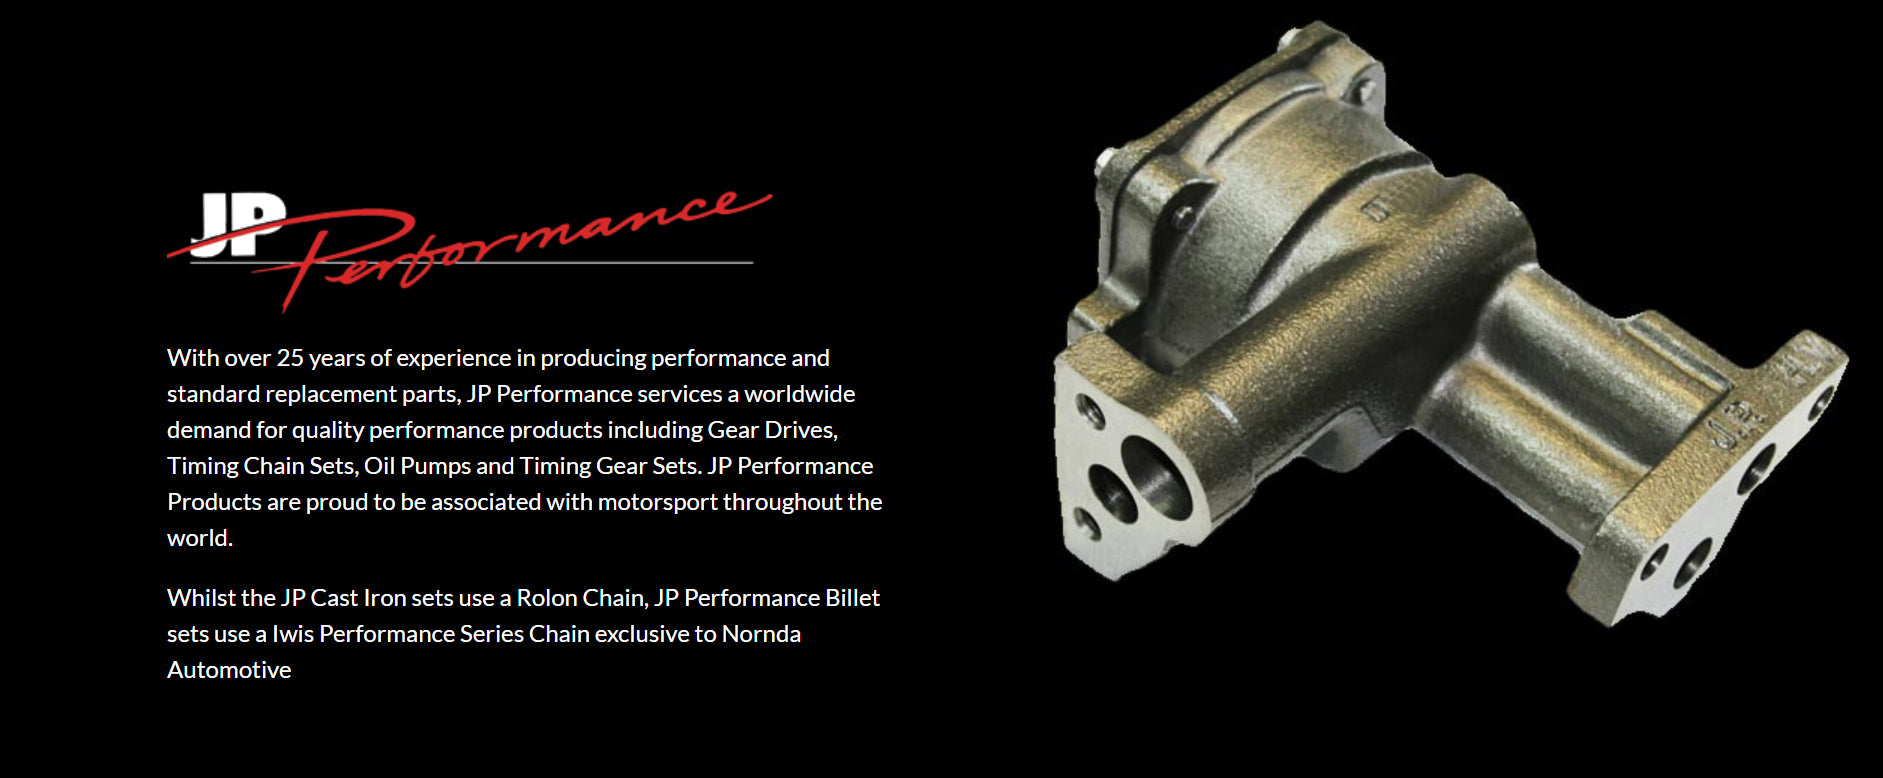 With over 25 years of experience in producing performance and standard replacement parts, JP Performance services a worldwide demand for quality performance products including Gear Drives, Timing Chain Sets, Oil Pumps and Timing Gear Sets. JP Performance Products are proud to be associated with motorsport throughout the world.  Whilst the JP Cast Iron sets use a Rolon Chain, JP Performance Billet sets use a Iwis Performance Series Chain exclusive to Nornda Automotive